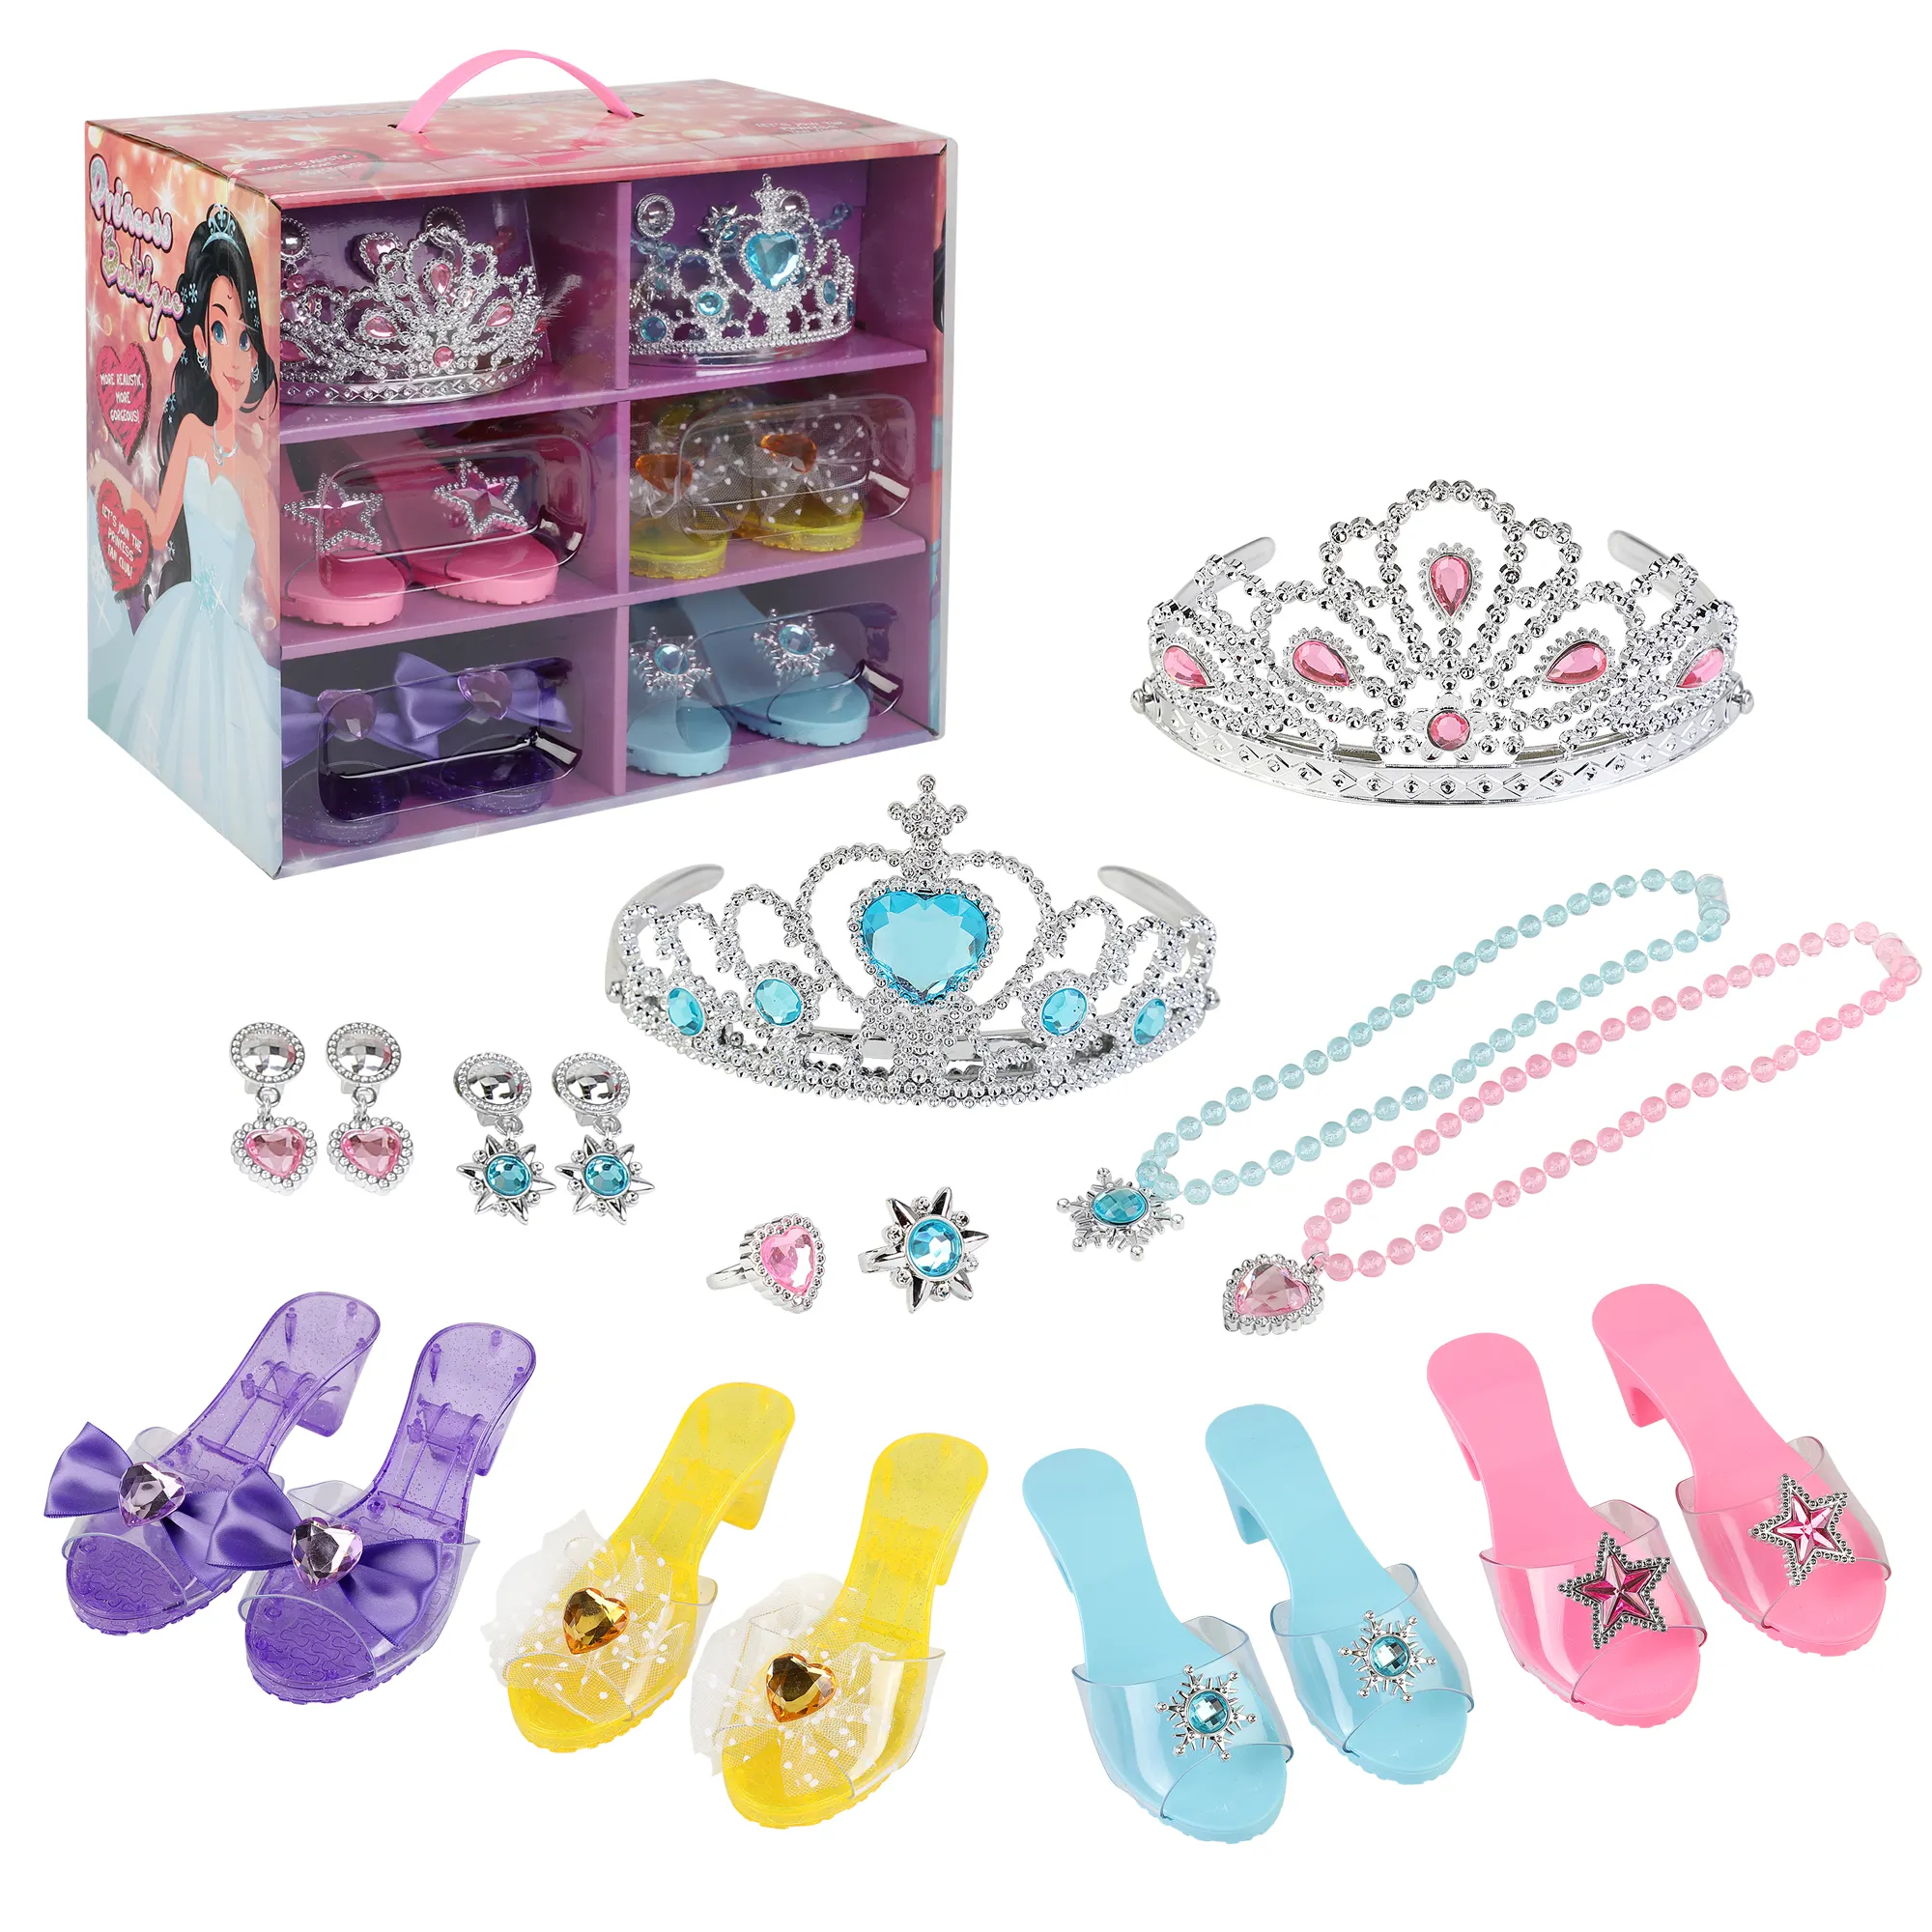 Dressing Set for Children Realistic Wear Shiny High Heels and Jewelry Set Crowns For Queens Children Dressing Princess Toys